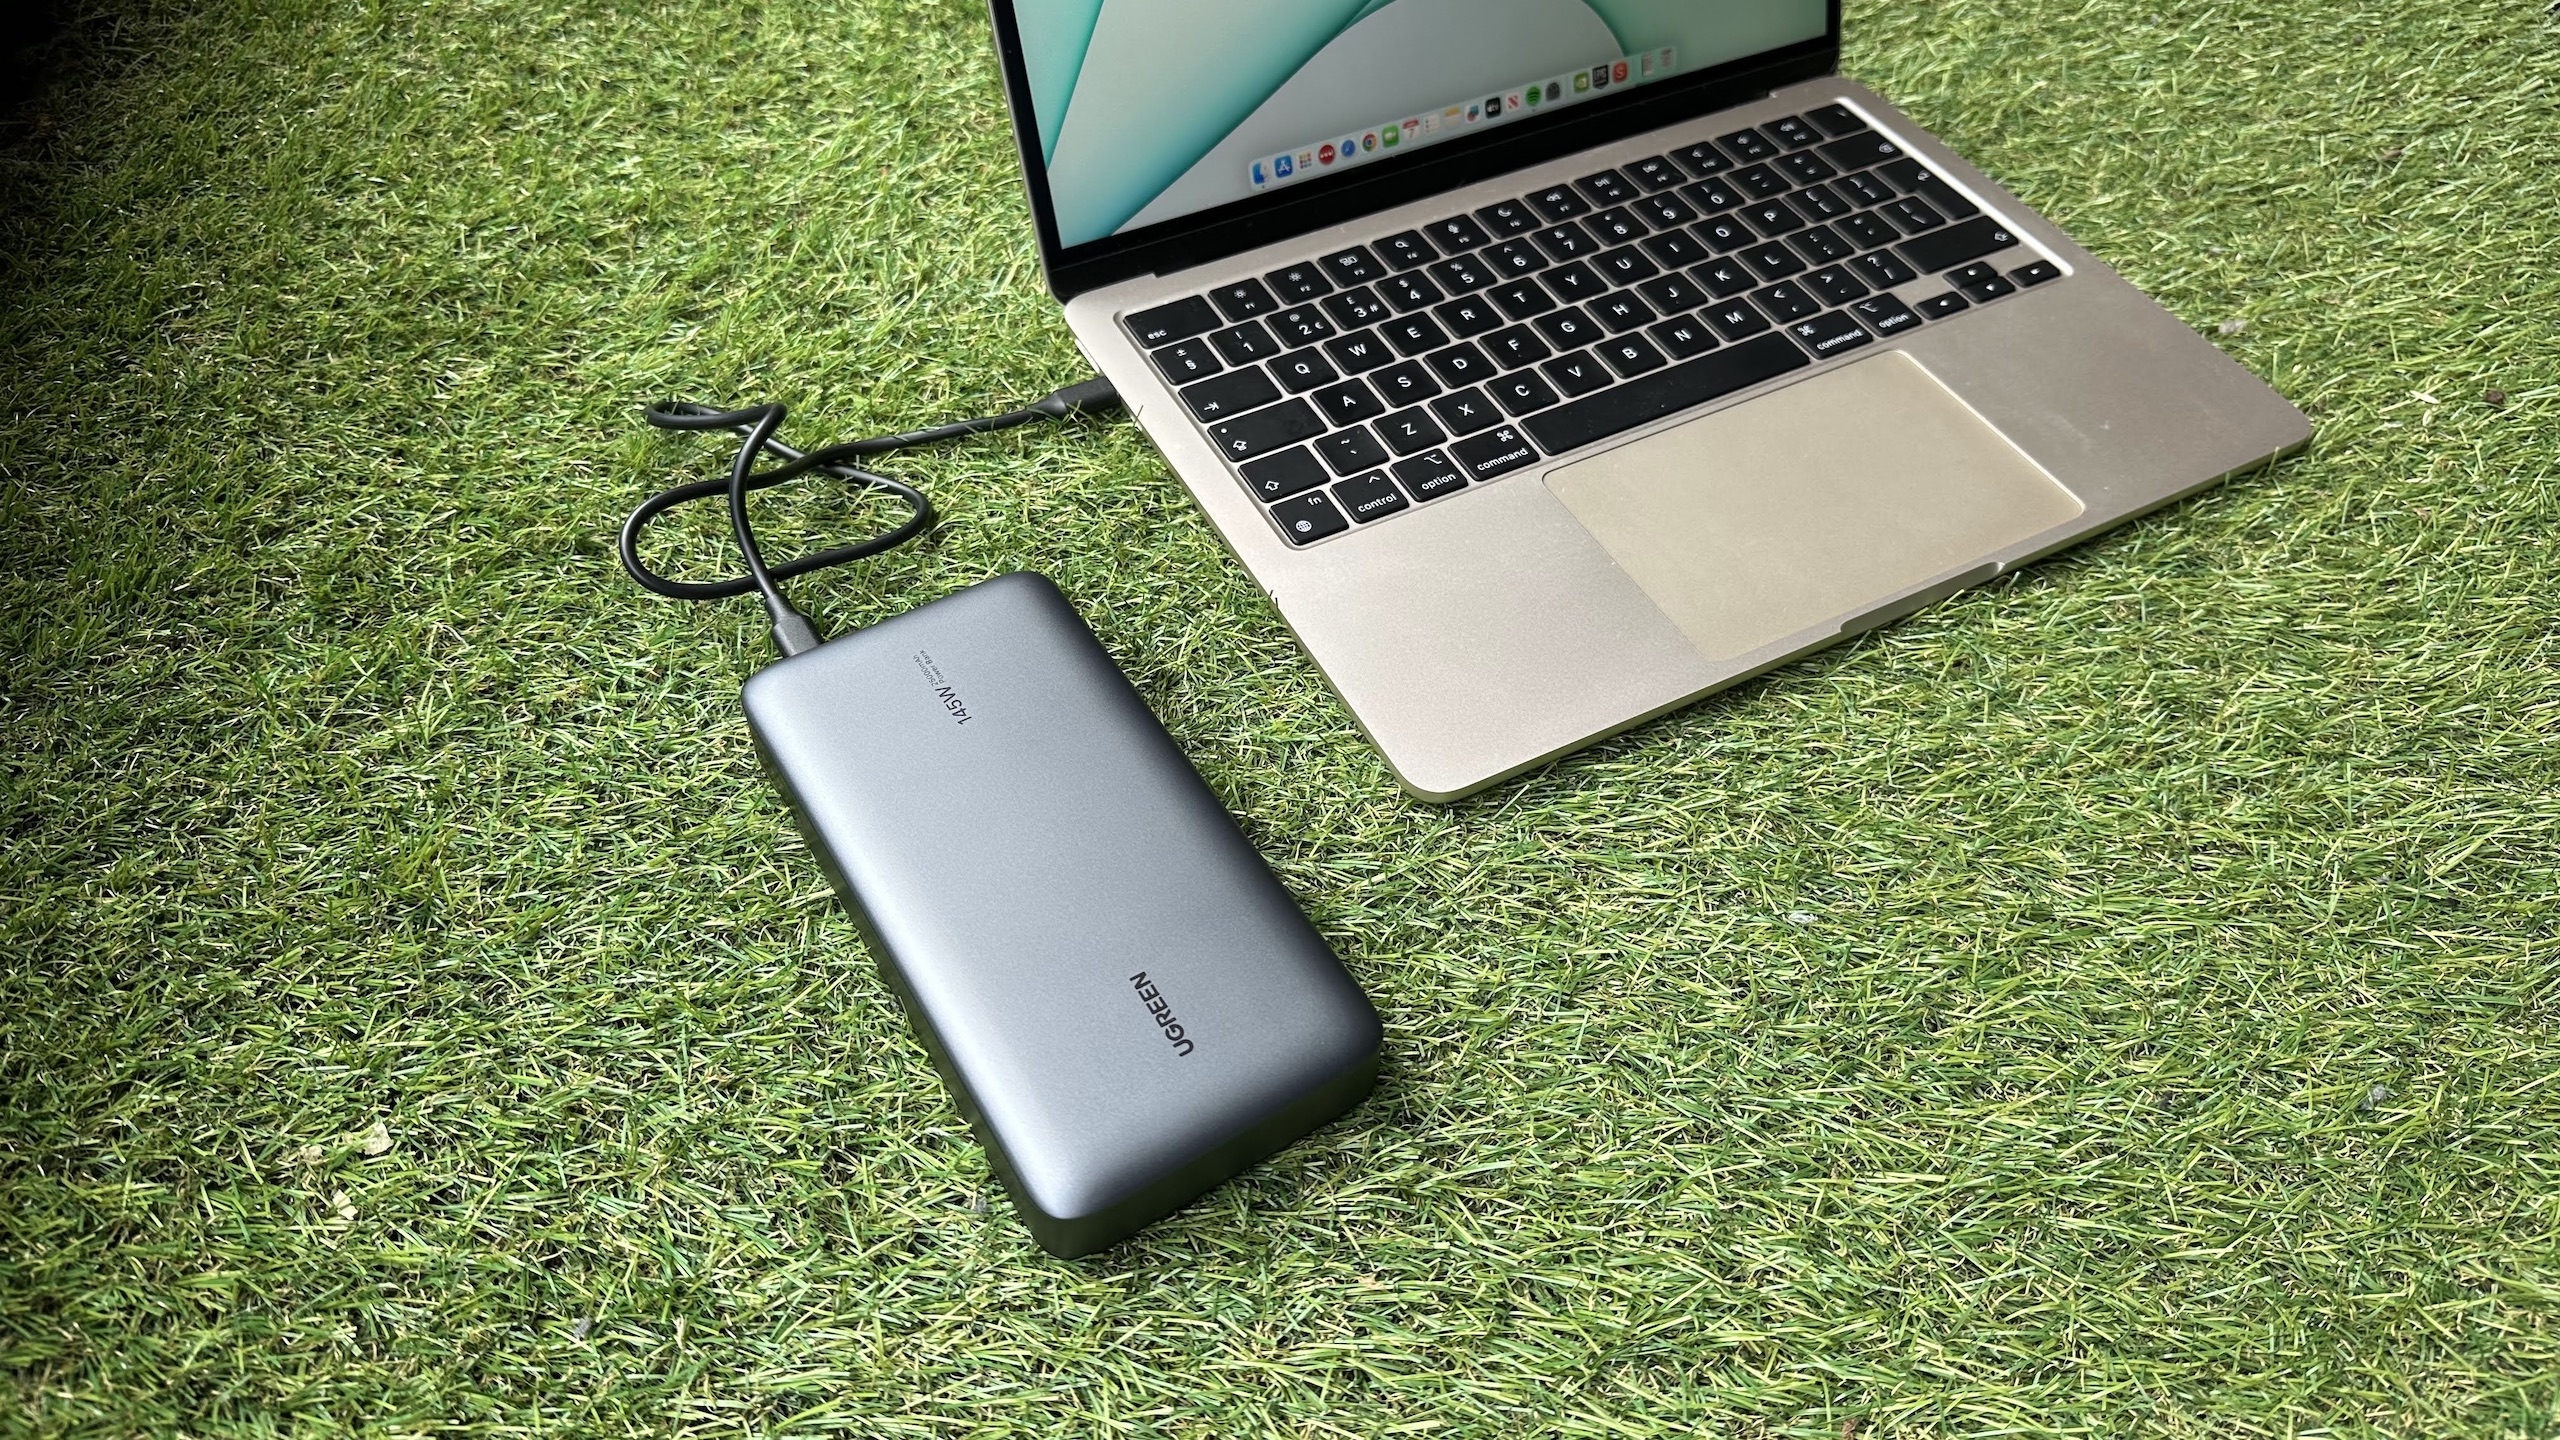 UGreen 145W power bank review: 25,000mAh juice for a MacBook and